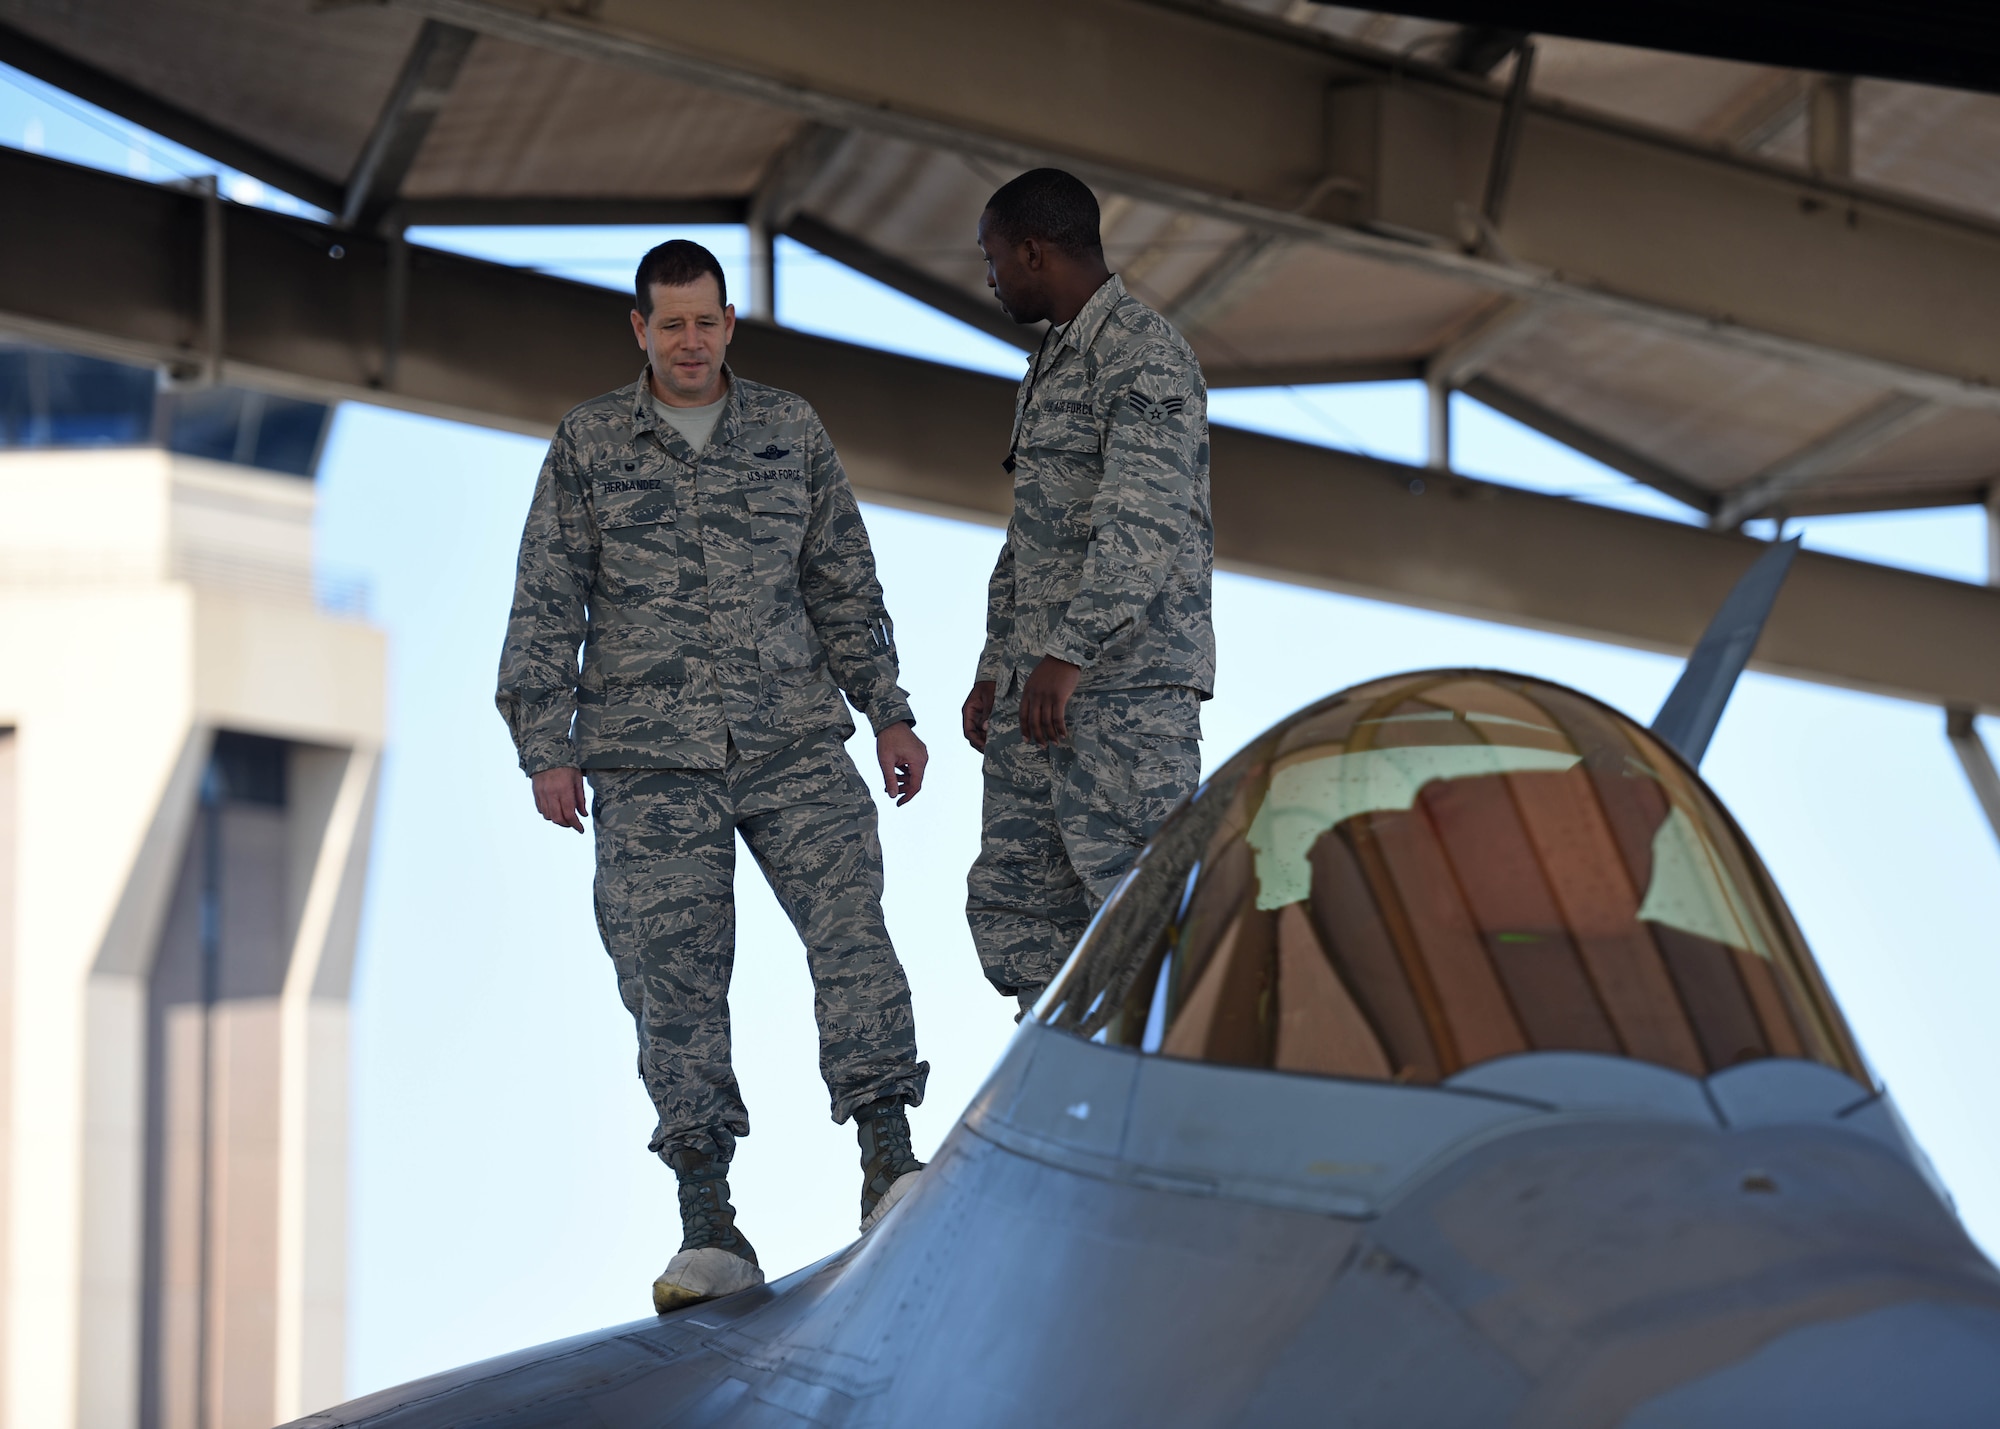 U.S. Air Force Senior Airman Gerald Austin (right), 44th Fighter Group, 44th Maintenance Squadron aircraft maintenance journeyman, stands atop an F-22 Raptor with Col. Michael Hernandez, 325th Fighter Wing commander, while participating in the Airman Shadow Program at Tyndall Air Force Base, Fla., Nov. 3, 2017. Austin was chosen by his leadership to showcase his duties as an F-22 Raptor crew chief to the commander. (U.S. Air Force photo by Airman 1st Class Isaiah J. Soliz/Released)